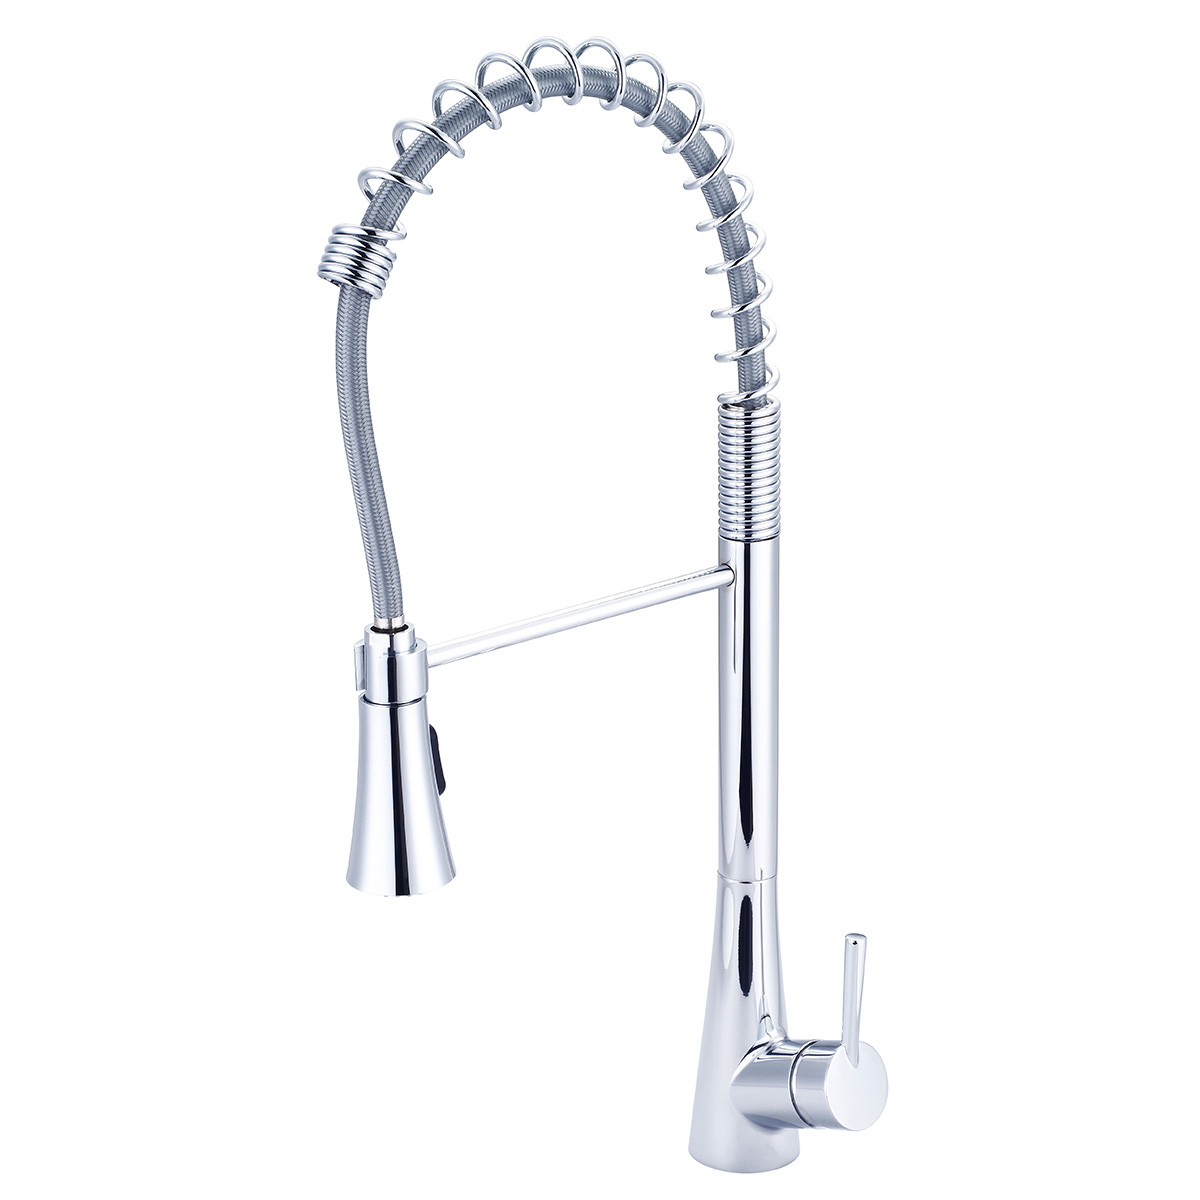 I2 K-5010 7.62 In. Single Handle Pre-rinse Spring Pull-down Kitchen Faucet - Chrome